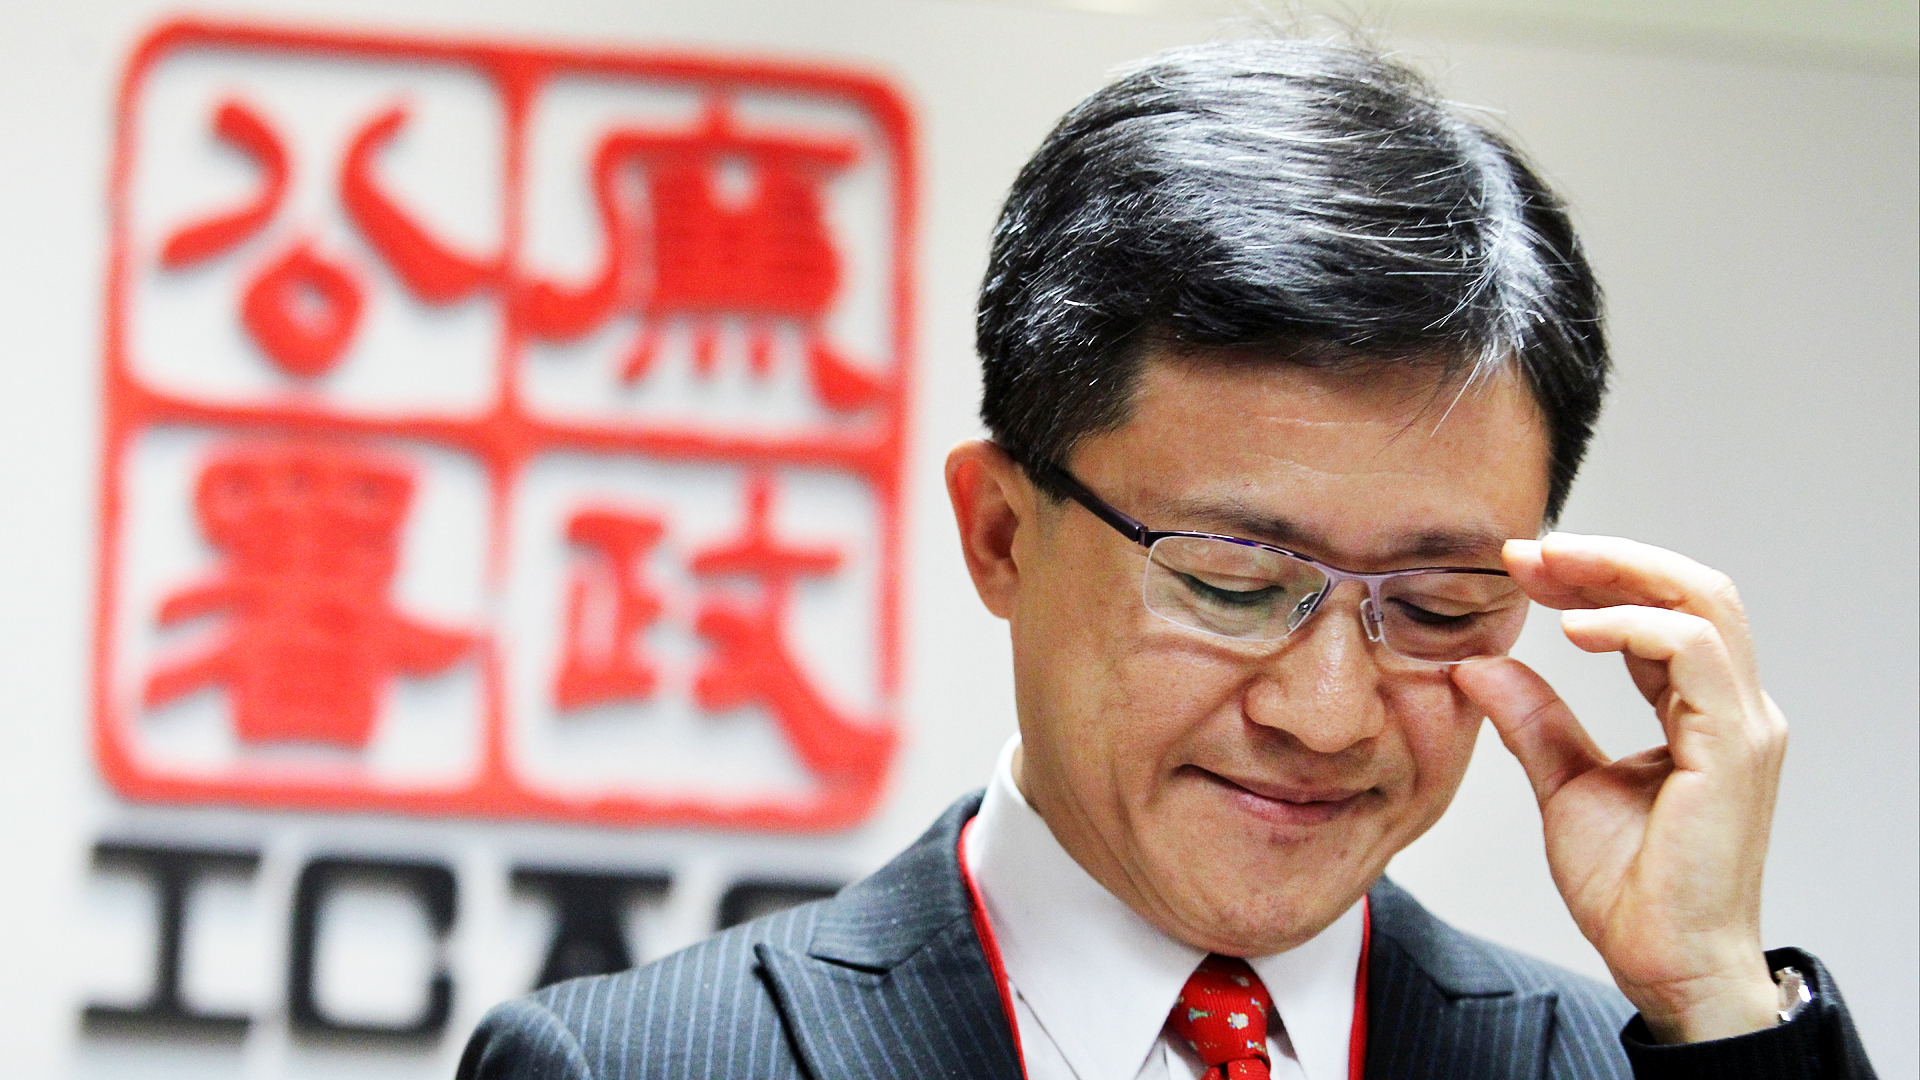 ICAC commissioner, Simon Peh, confirmed the anti-graft body's interest in technology that could intercept computers and cell phone data. Photo: Sam Tsang